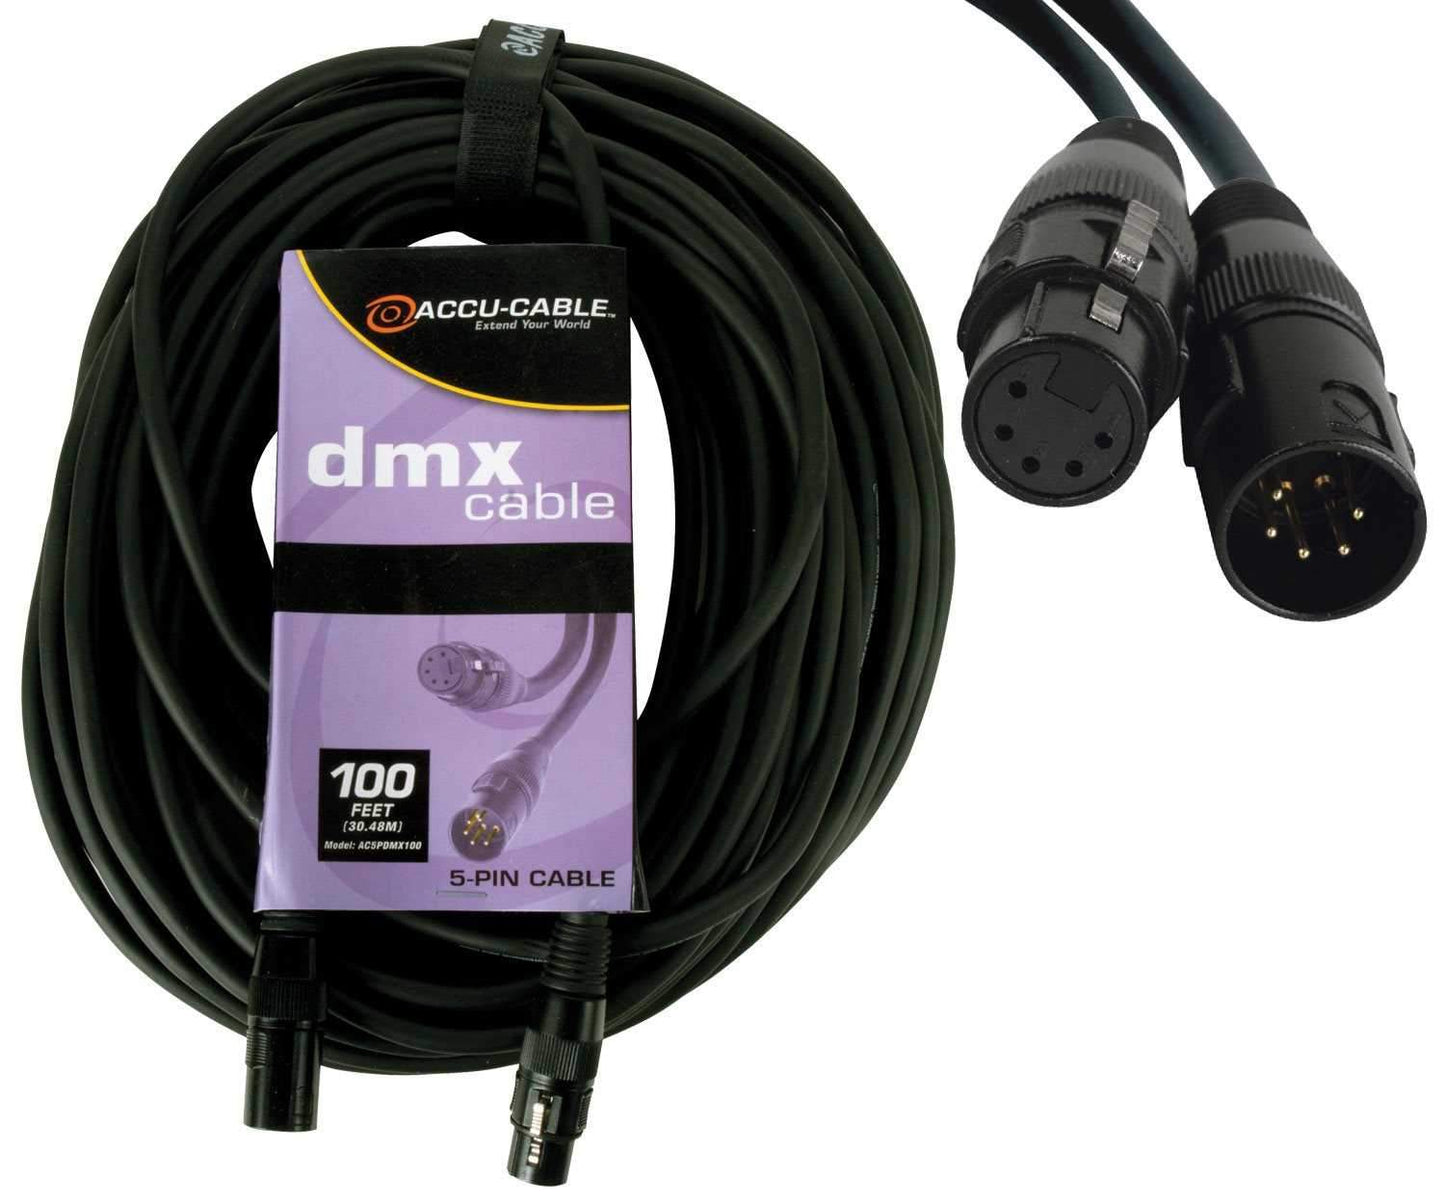 Accu-Cable DMX 5-Pin Data Cable 100 Foot - ProSound and Stage Lighting